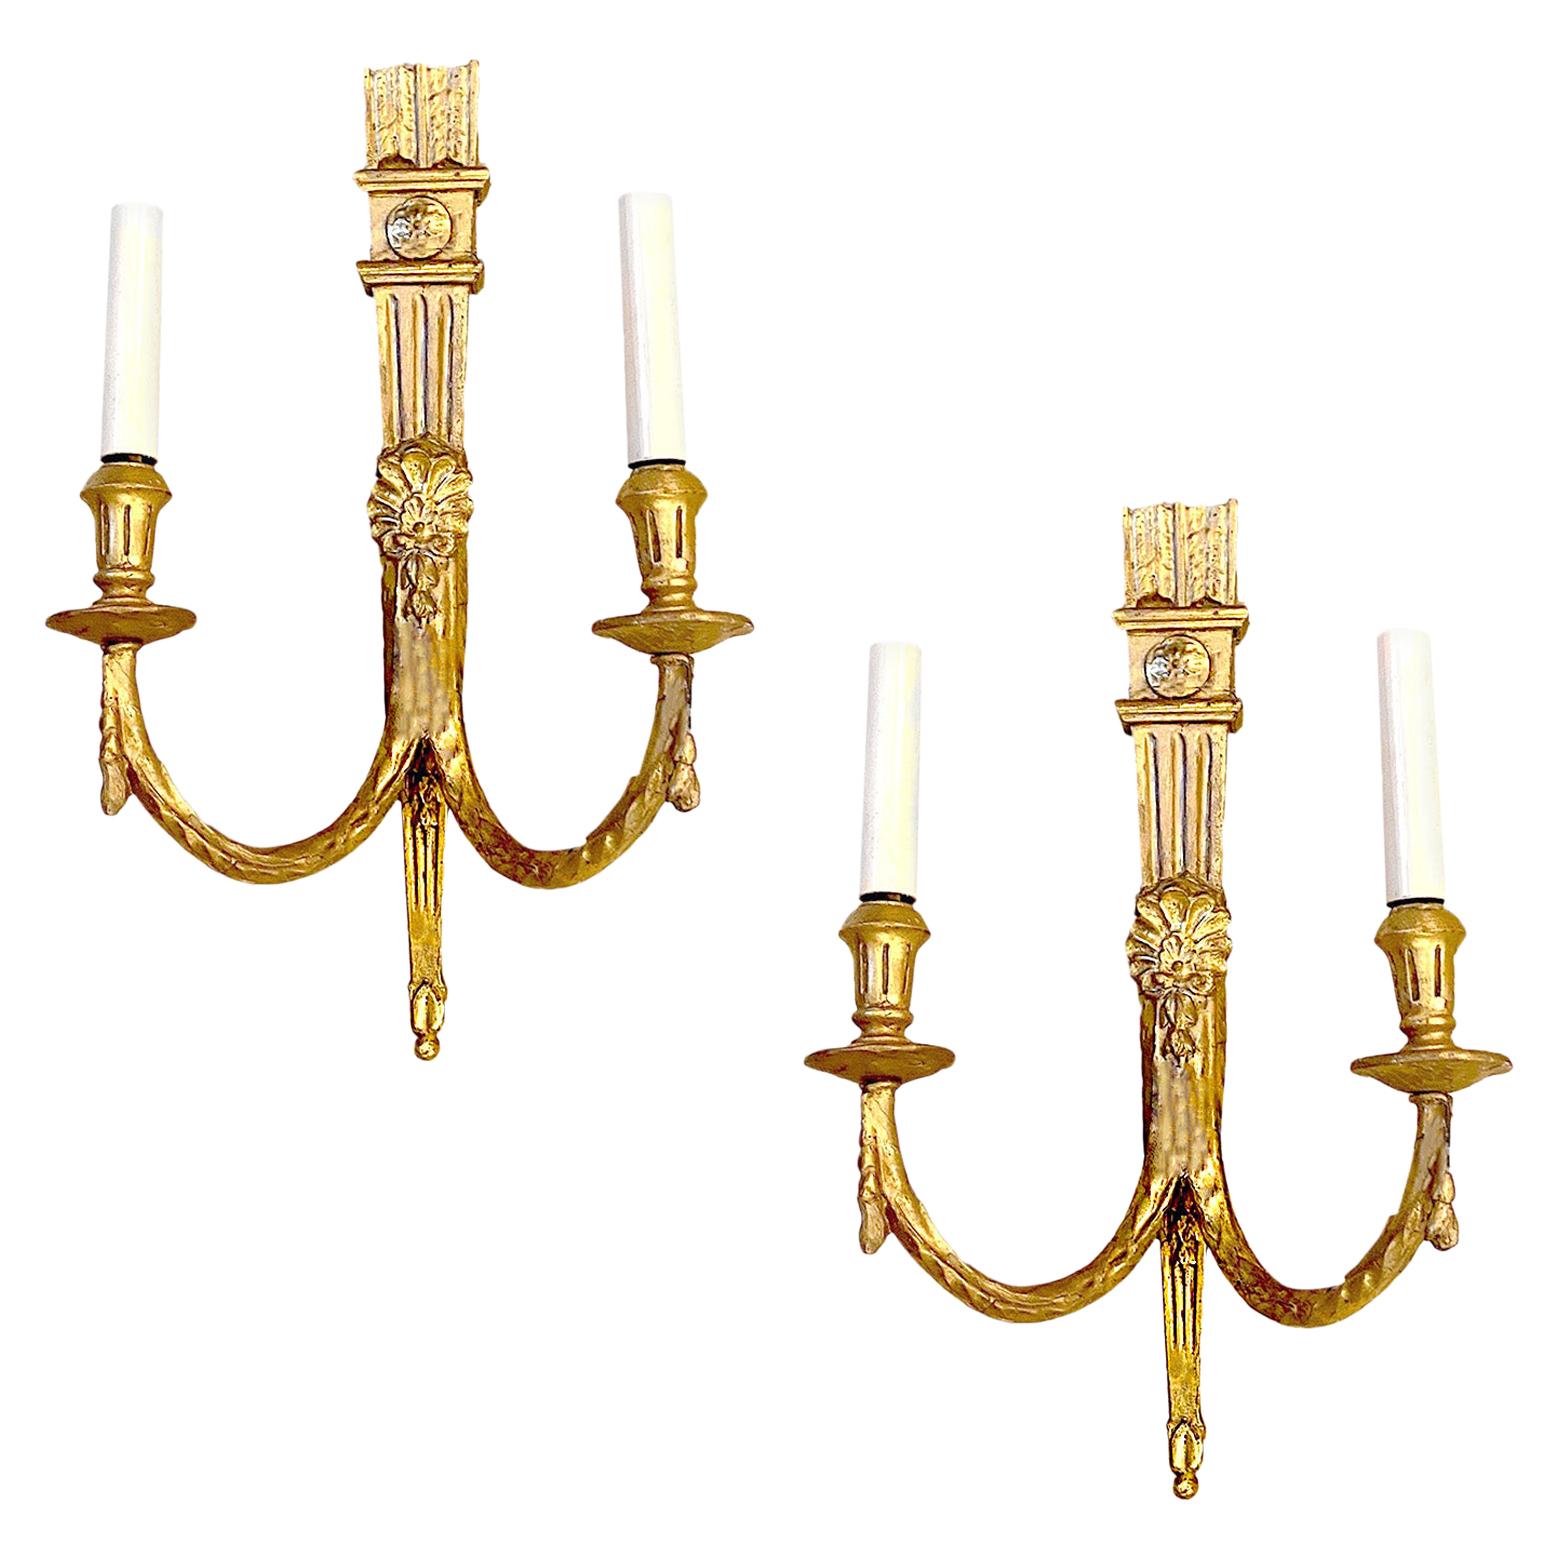 Antique French Giltwood Sconces